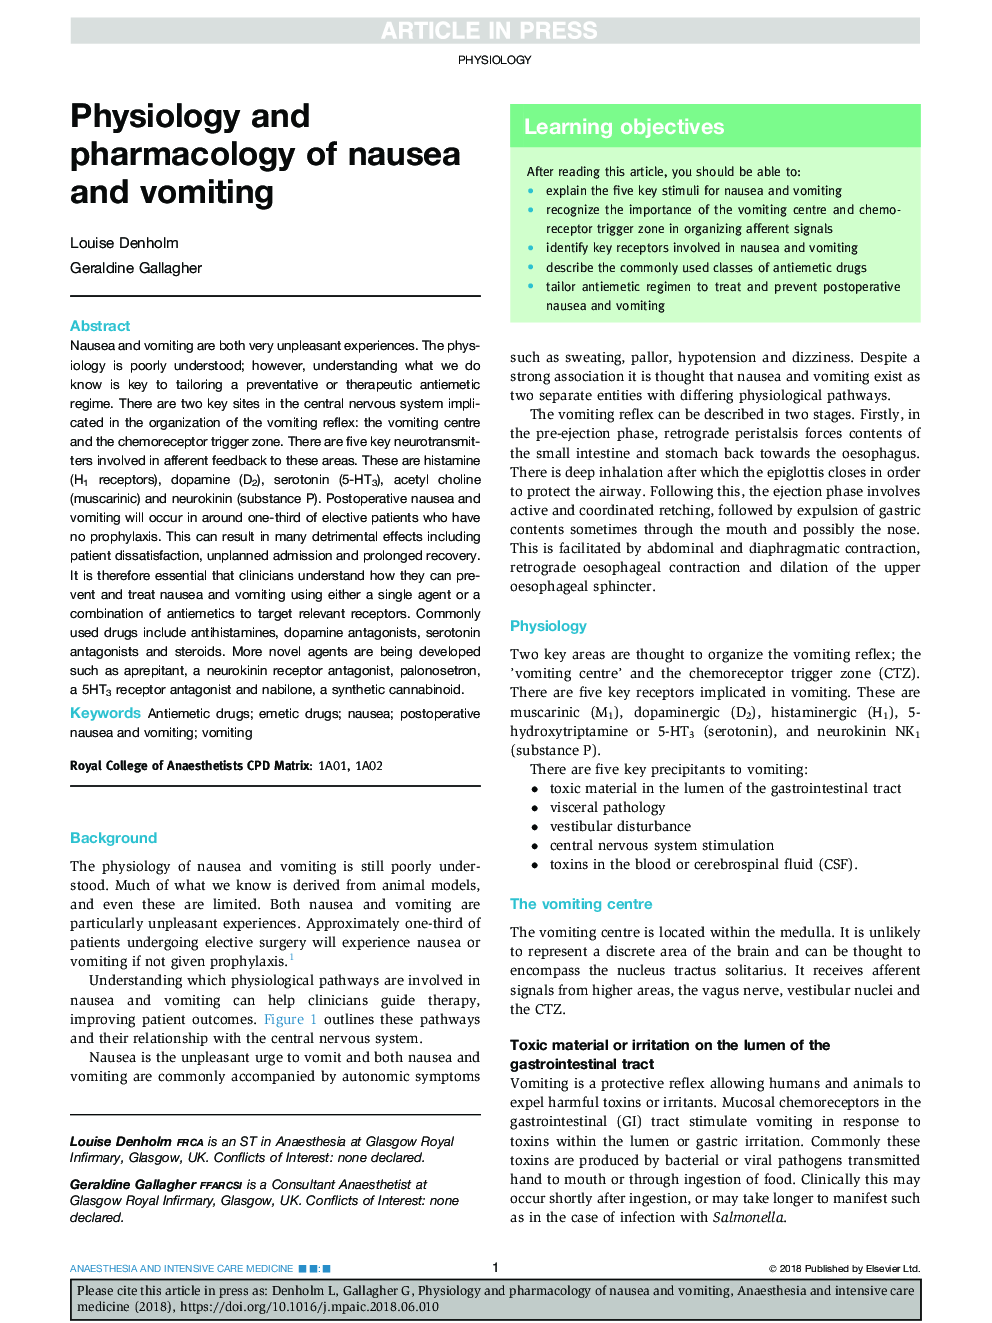 Physiology and pharmacology of nausea and vomiting